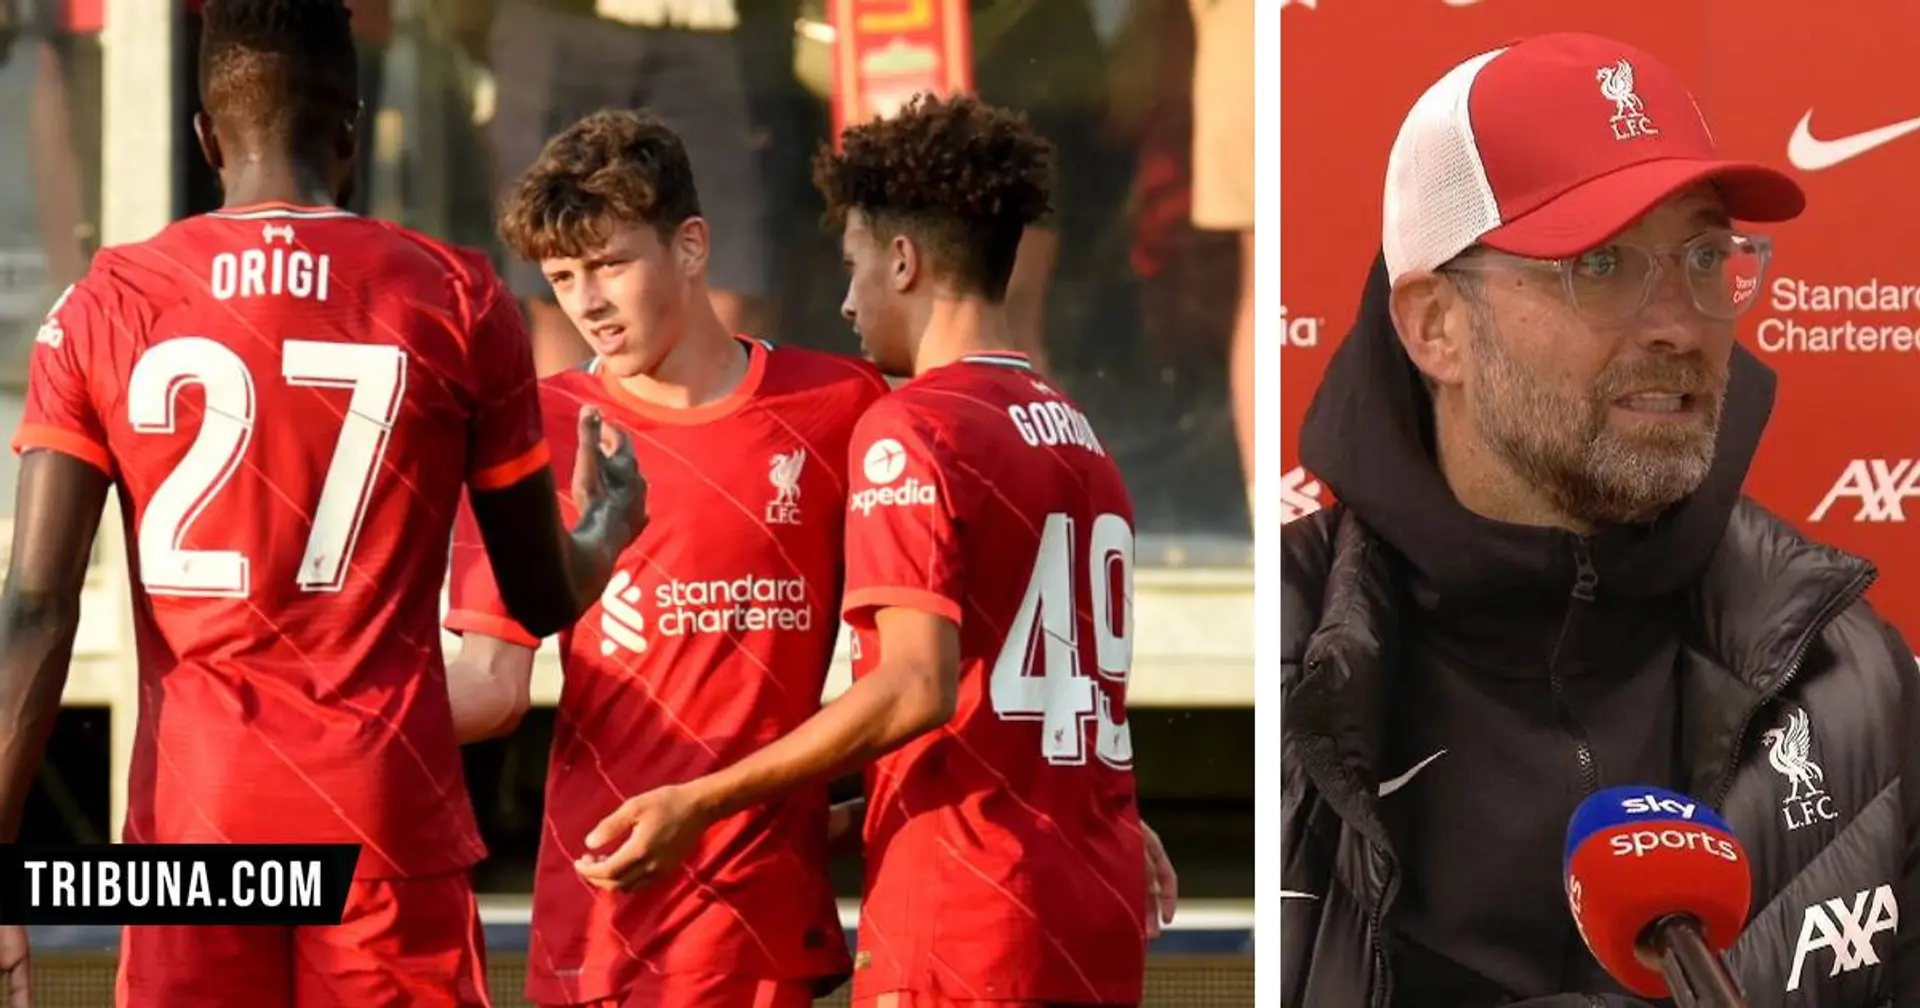 'We're helping them understand the game better': Klopp on improvement youngsters have made during preseason